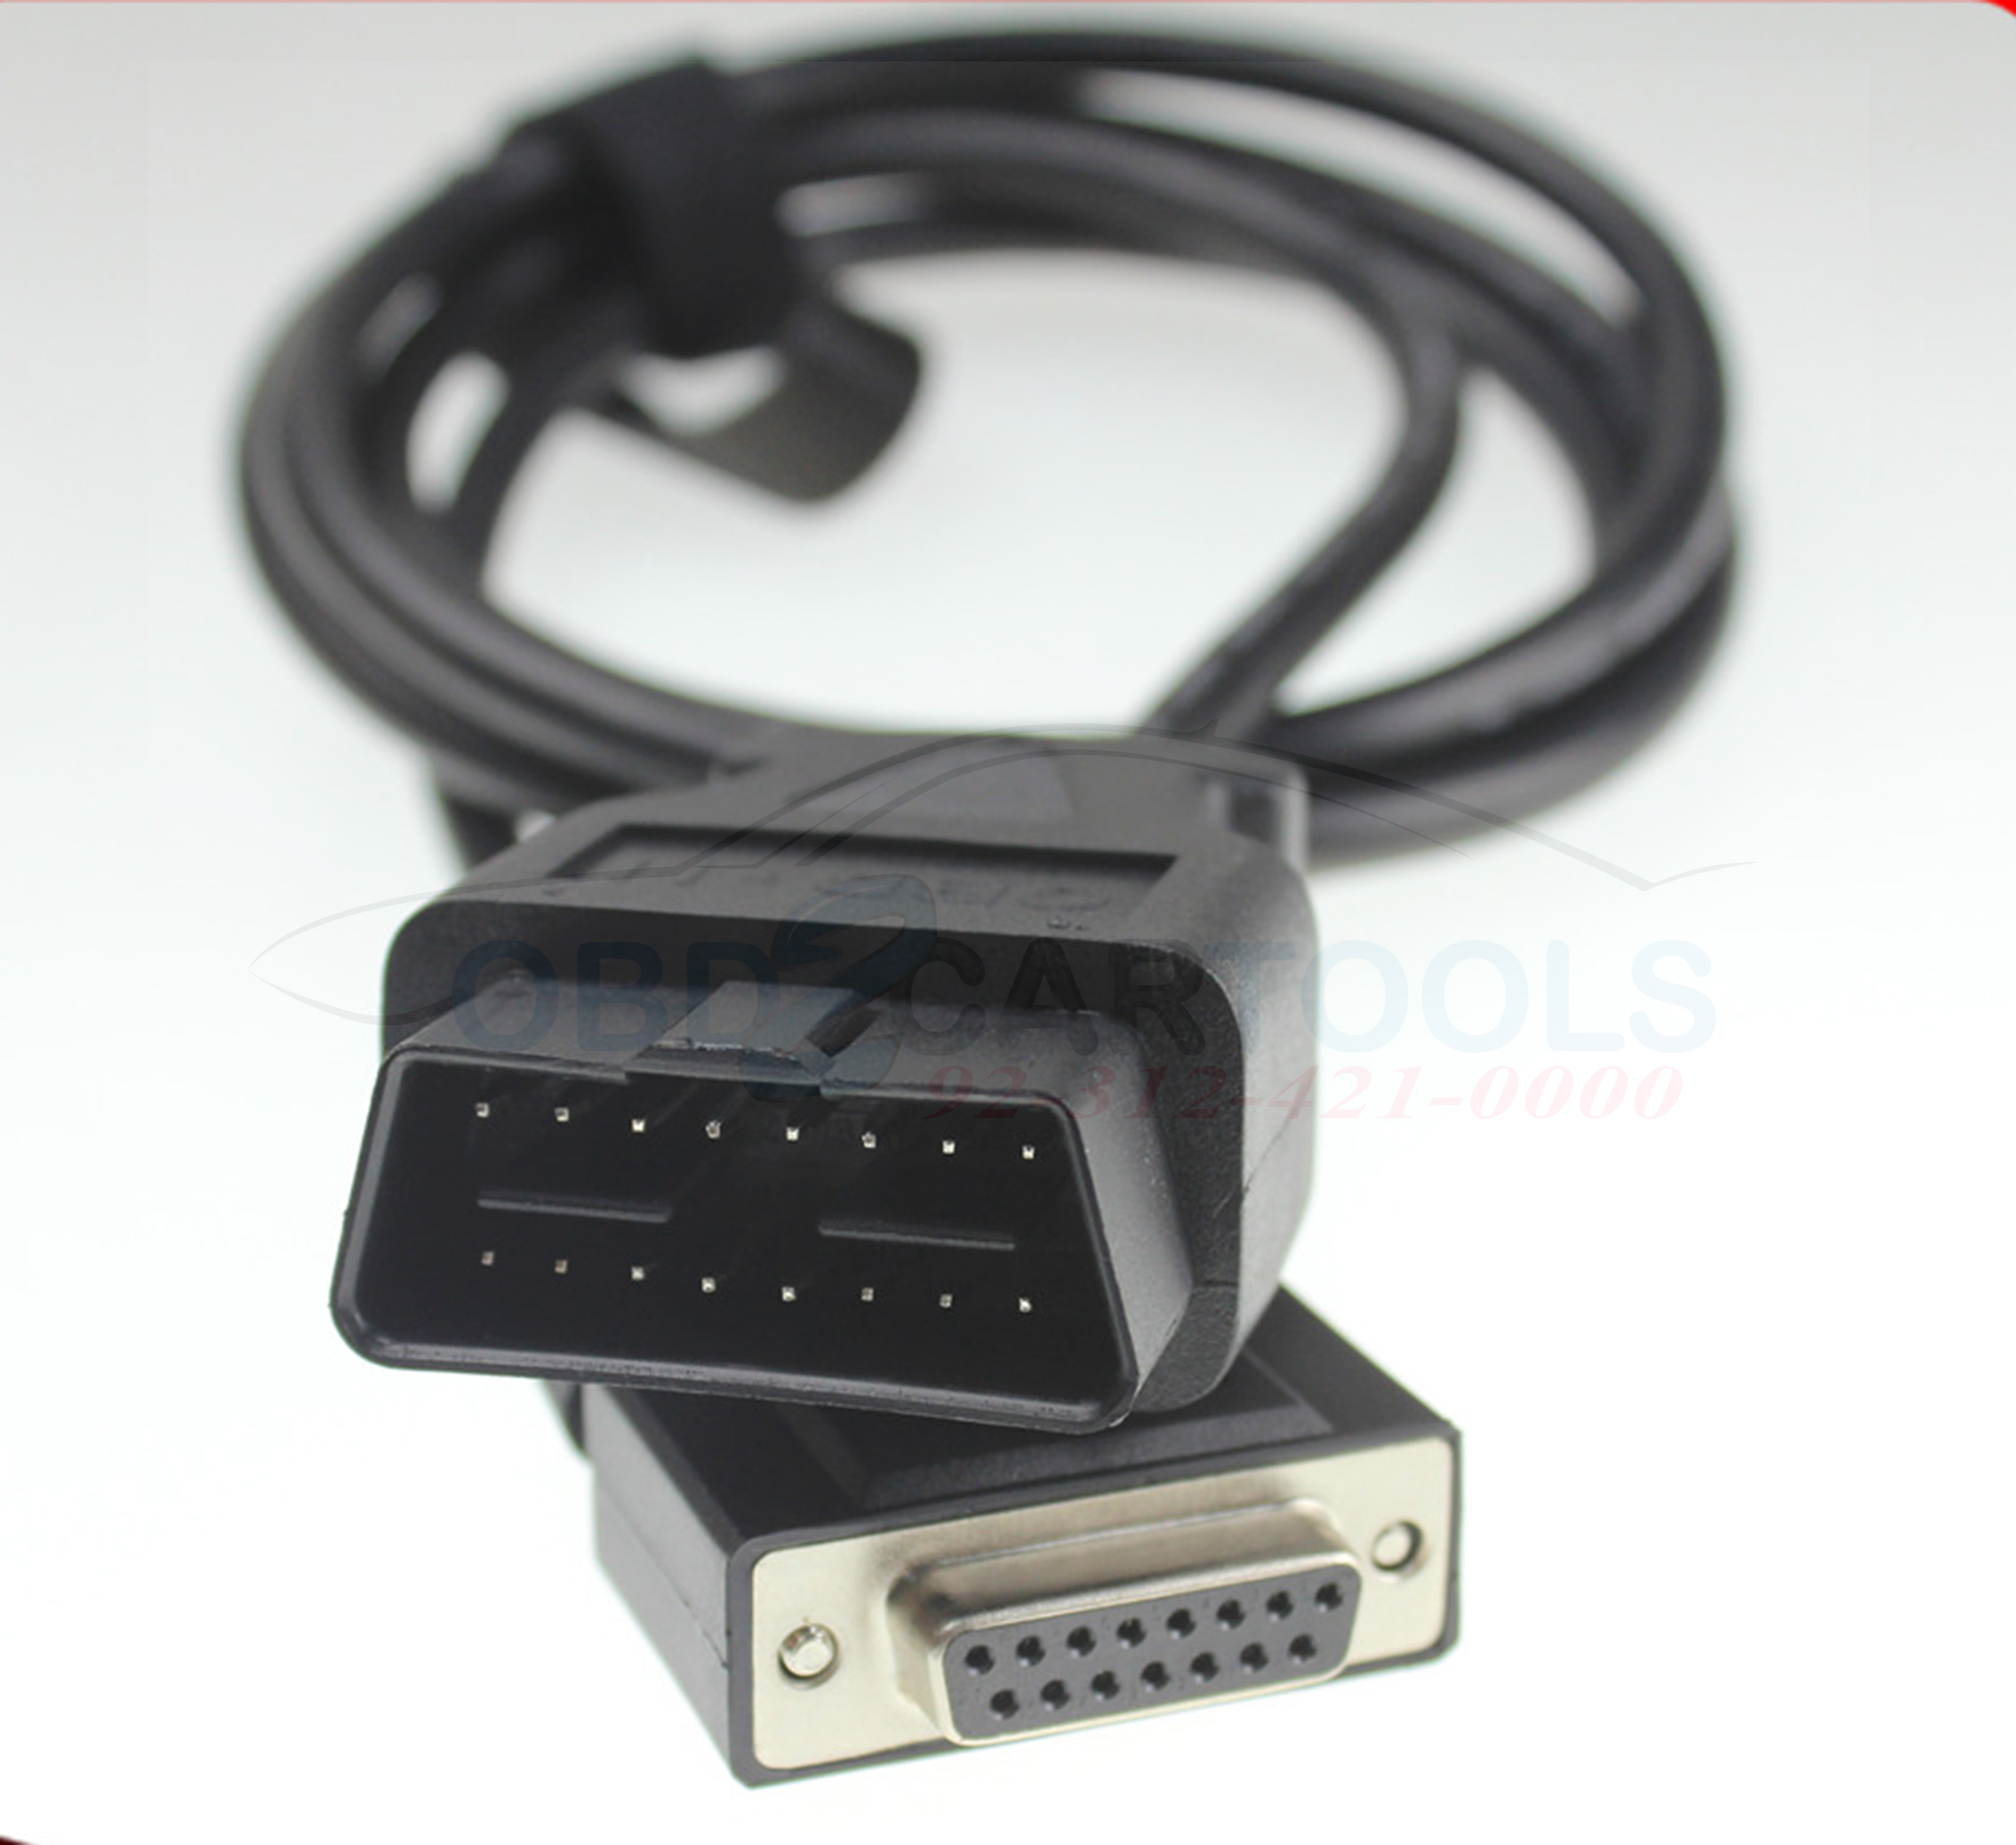 Product image for TOYOTA OTC IT3 GTS IT2 Test OBD2 Main Cable Diagnostic Tool cable